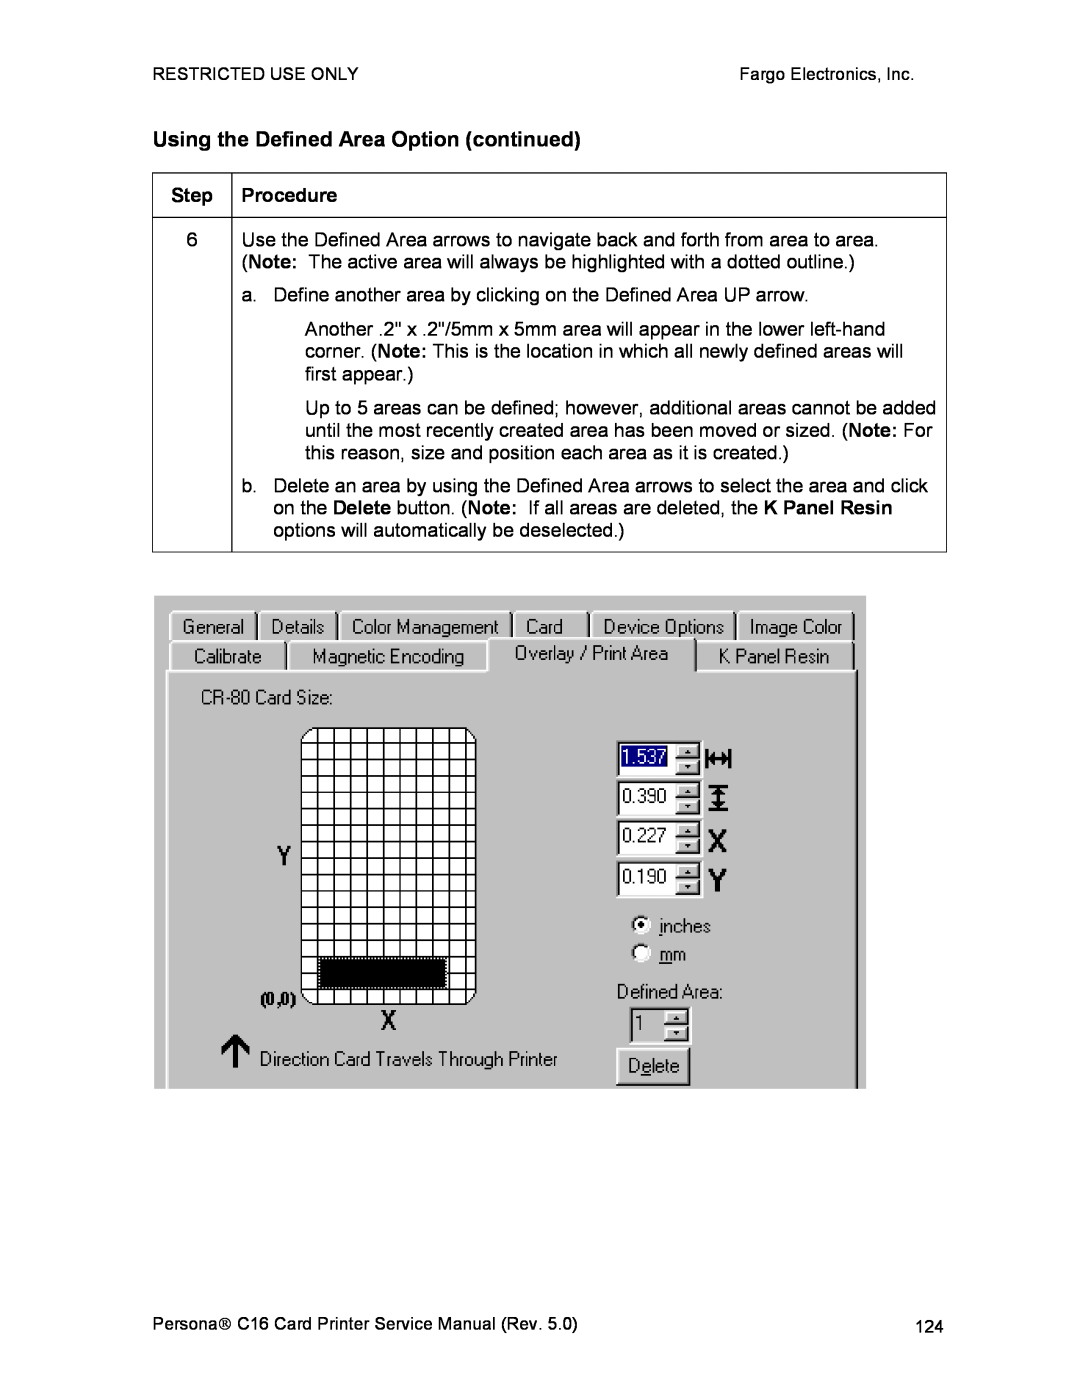 FARGO electronic C16 service manual Using the Defined Area Option continued 